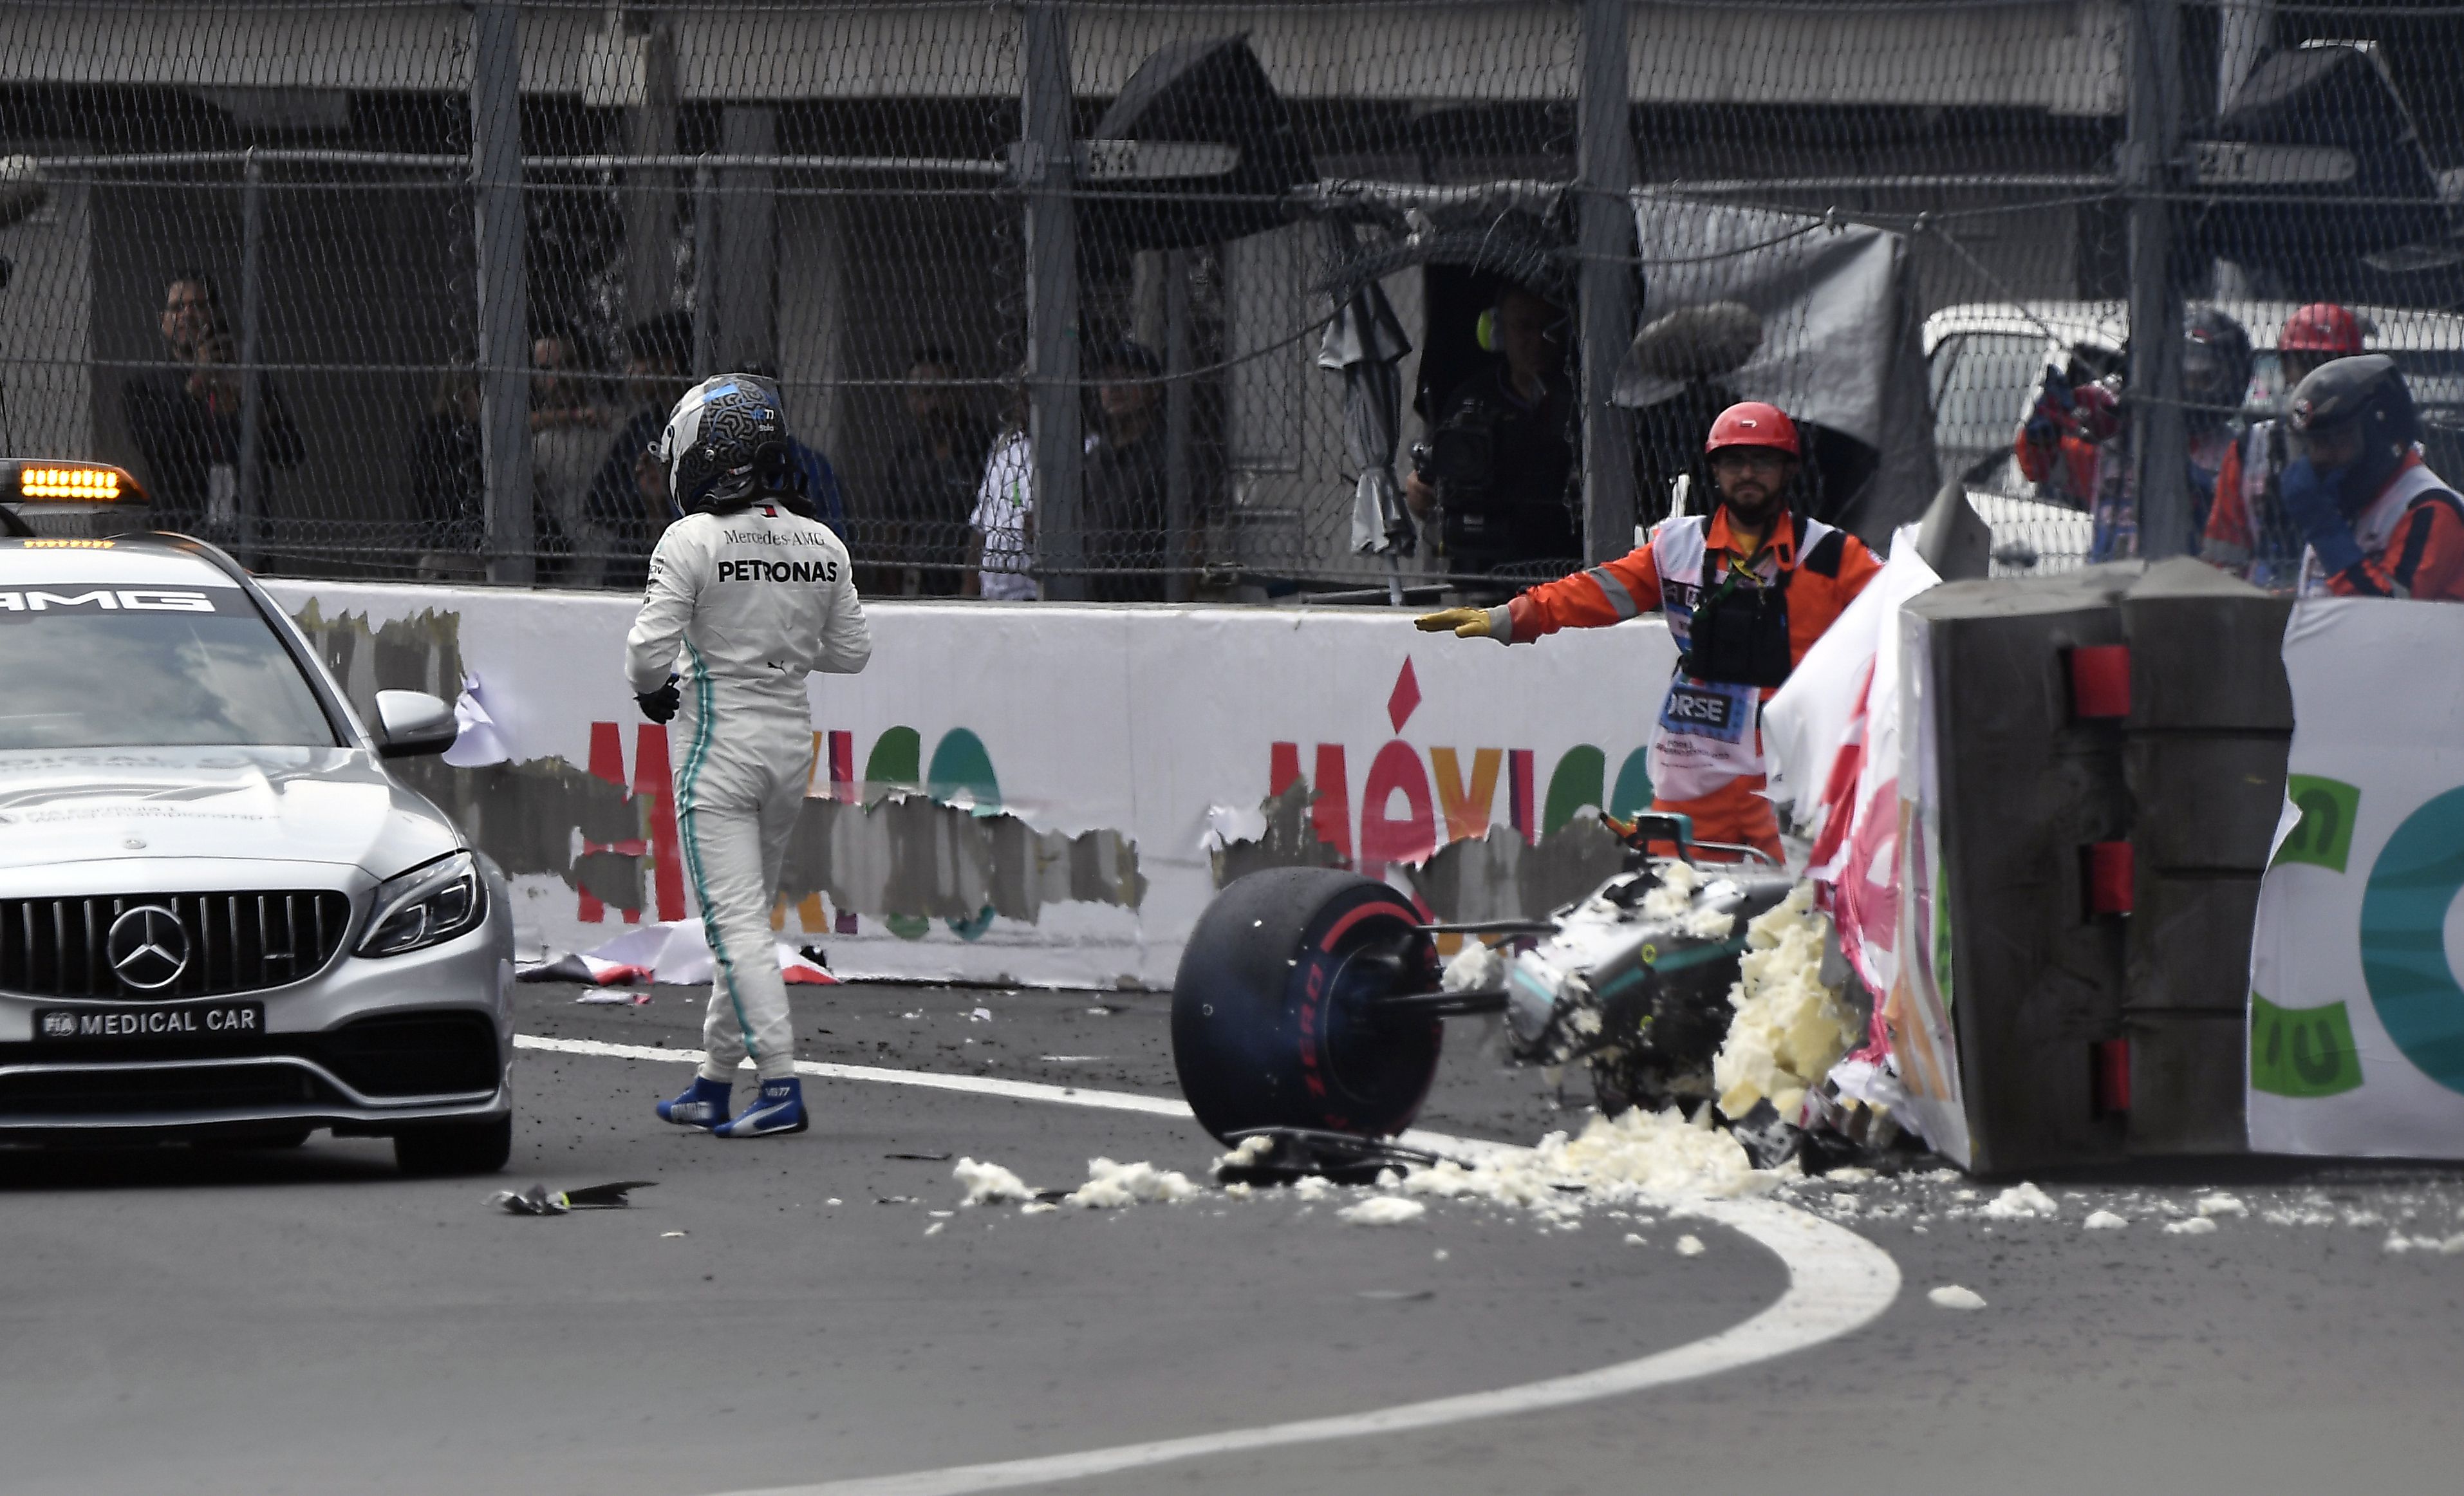 Mercedes Benz's Finnish driver Valtteri Bottas (L) walks after crashing his car during the qualifying session of the F1 Mexico Grand Prix at the Hermanos Rodriguez circuit in Mexico City on October 26, 2019. (Photo by ALFREDO ESTRELLA / AFP)